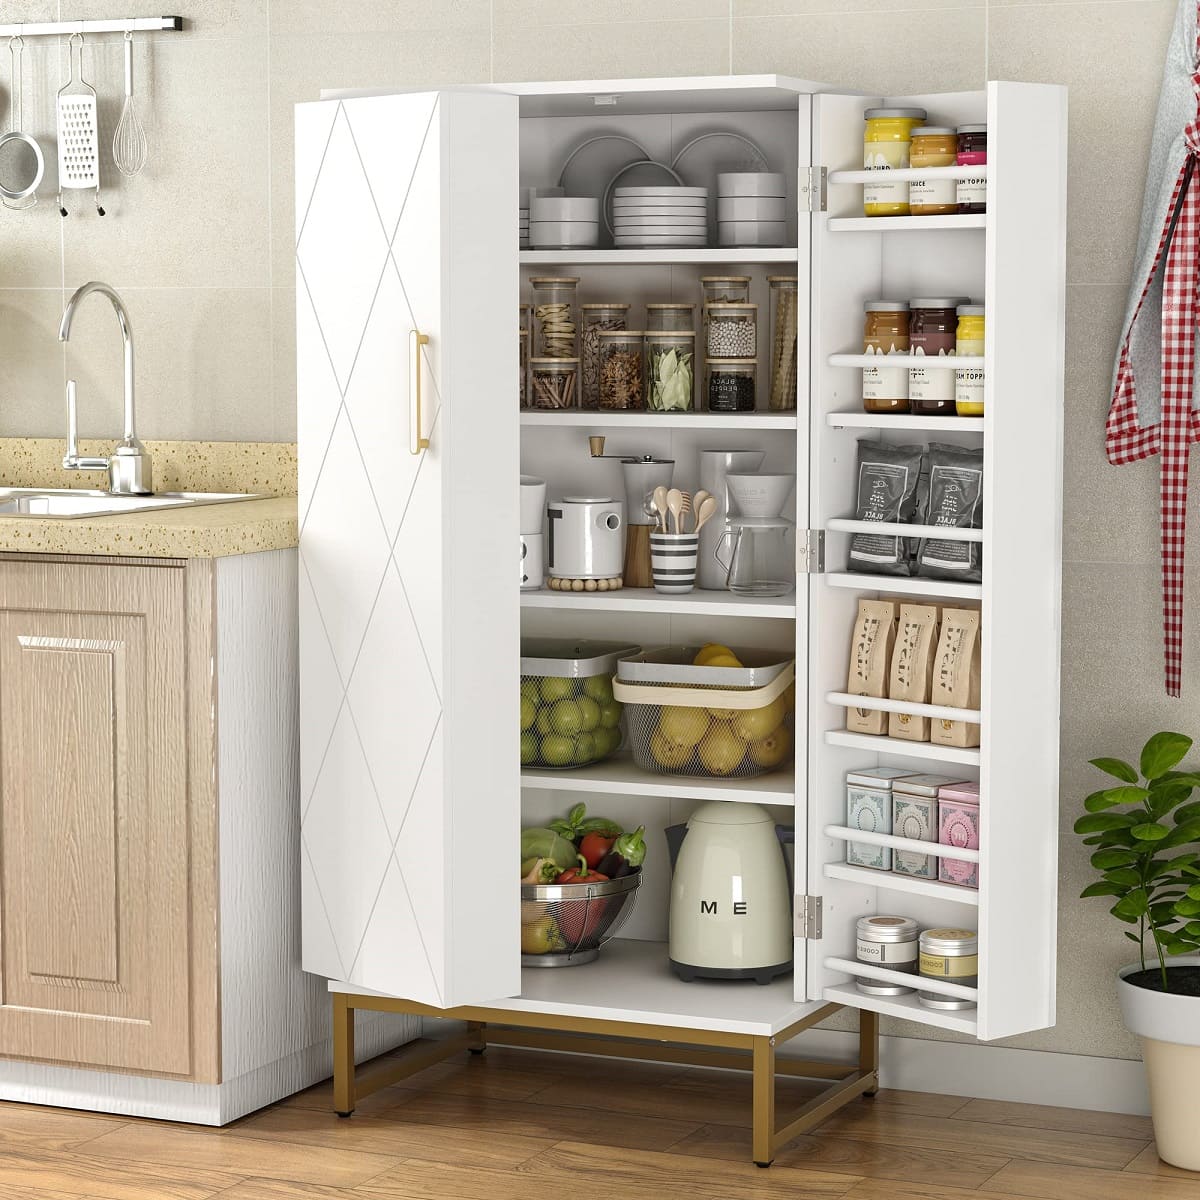 How To Build Kitchen Pantry Cabinet